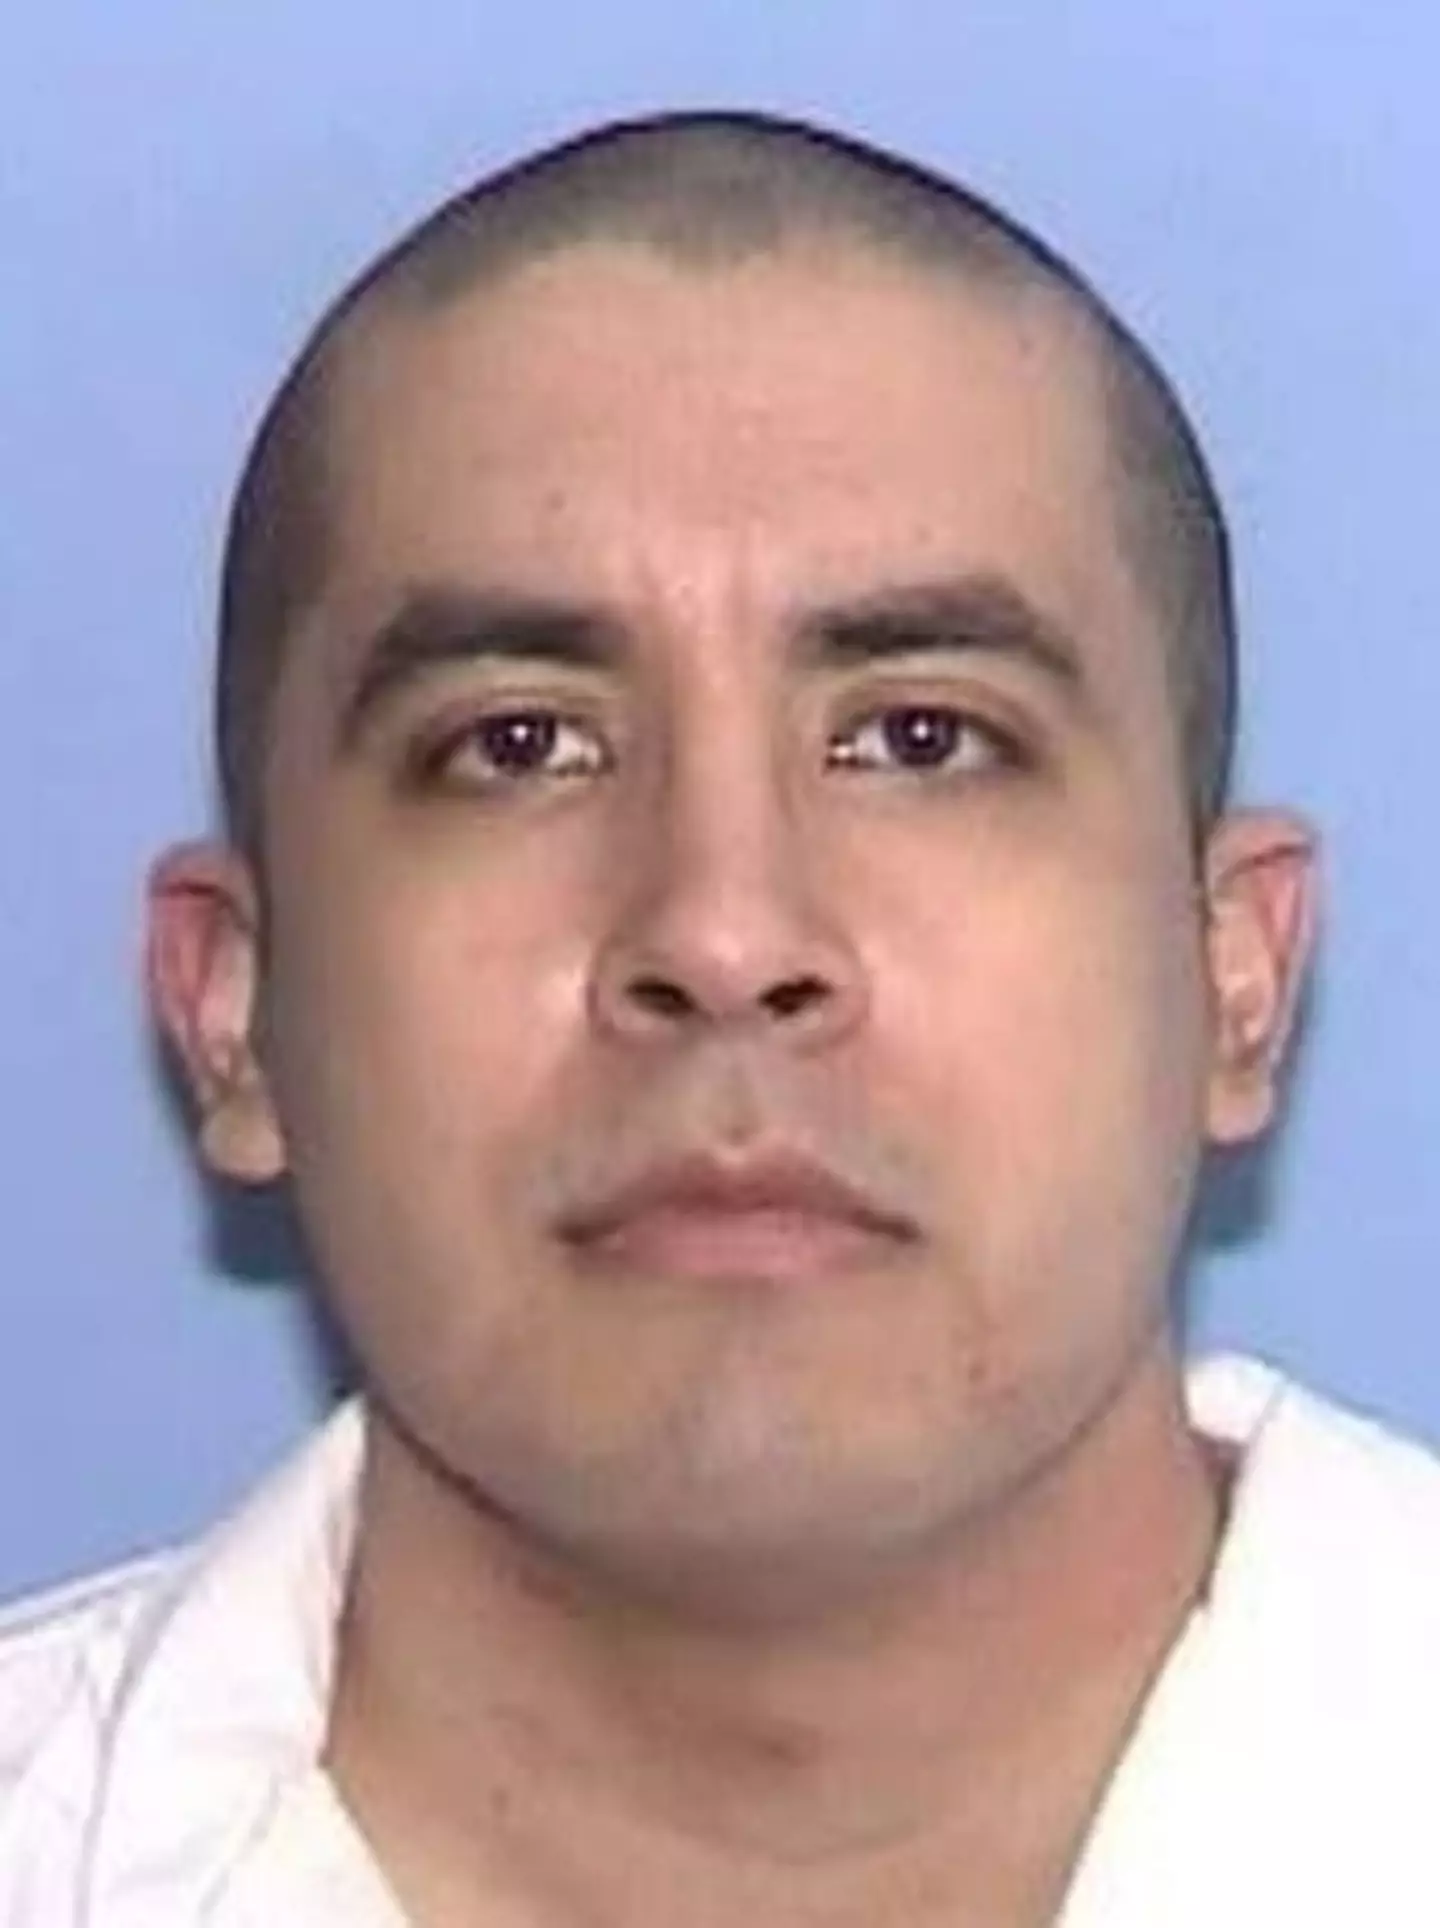 Rosendo Rodriguez was executed for the murder of a woman found in a suitcase.